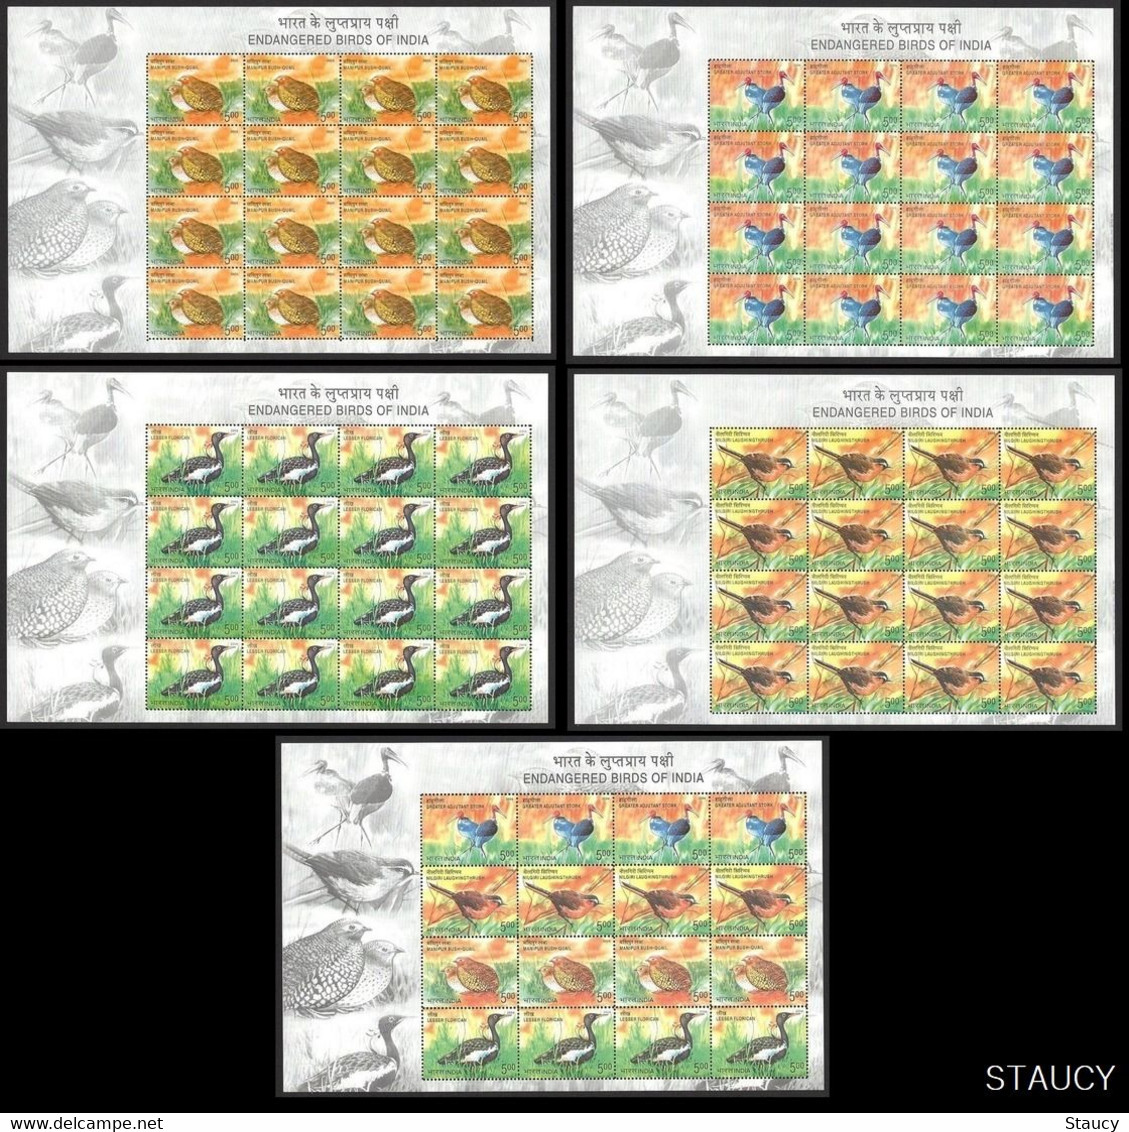 India 2006 Threatened Birds Mixed Sheetlet, Complete Set Of 5 Sheetlets MNH As Per Scan - Cygnes